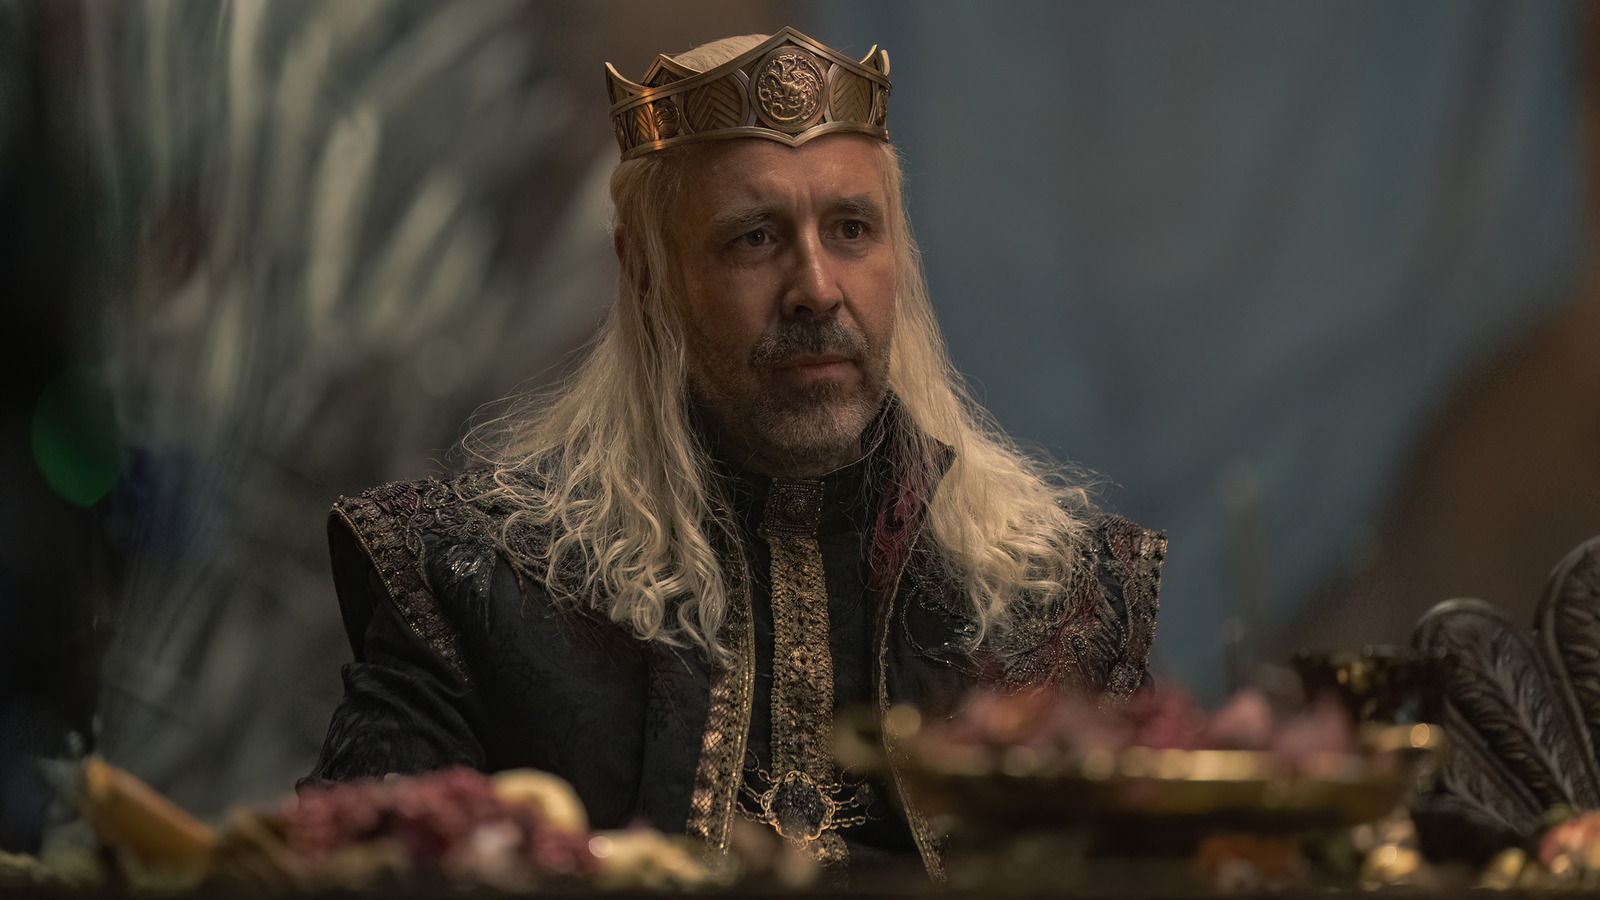 Paddy Considine calls House Of The Dragon's Viserys the "greatest character" he's ever played